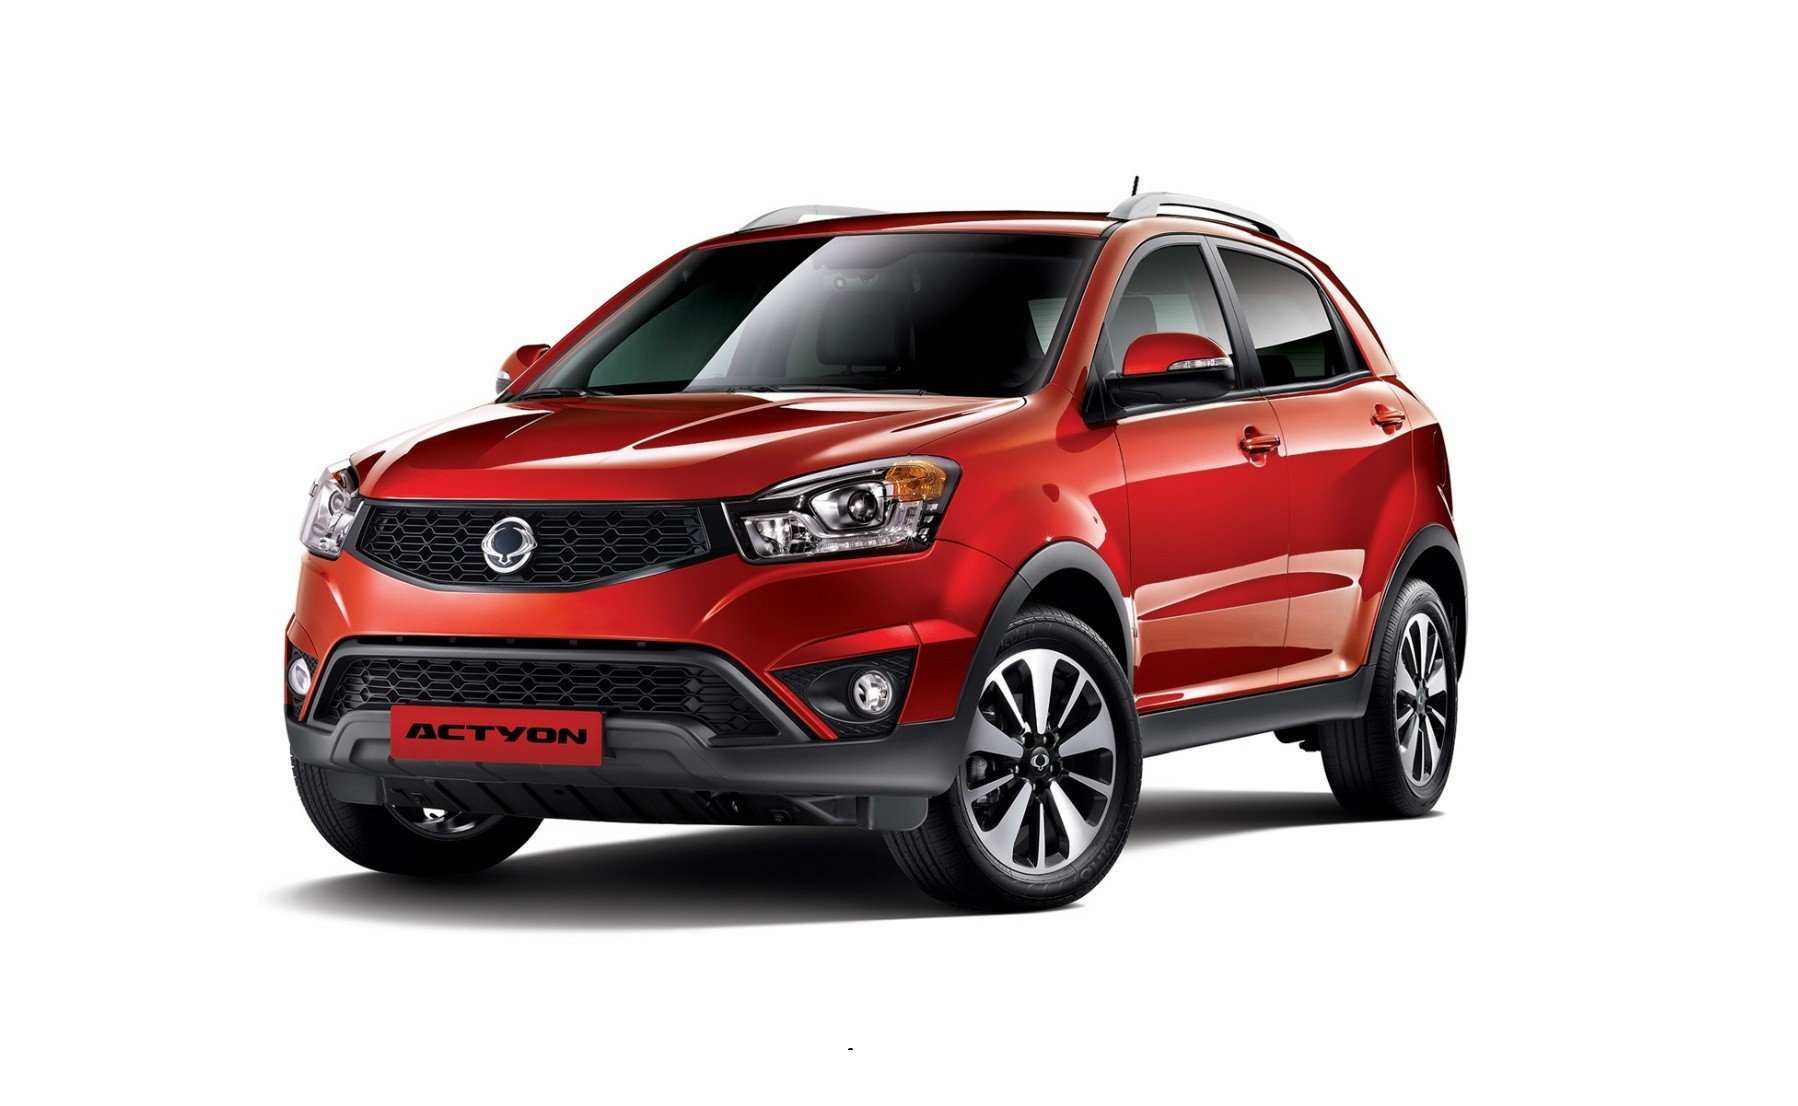 New actyon 2013. SSANGYONG Actyon II. SSANGYOUNG Act. SSANGYONG Actyon 2013. SSANGYONG Actyon New 2022.